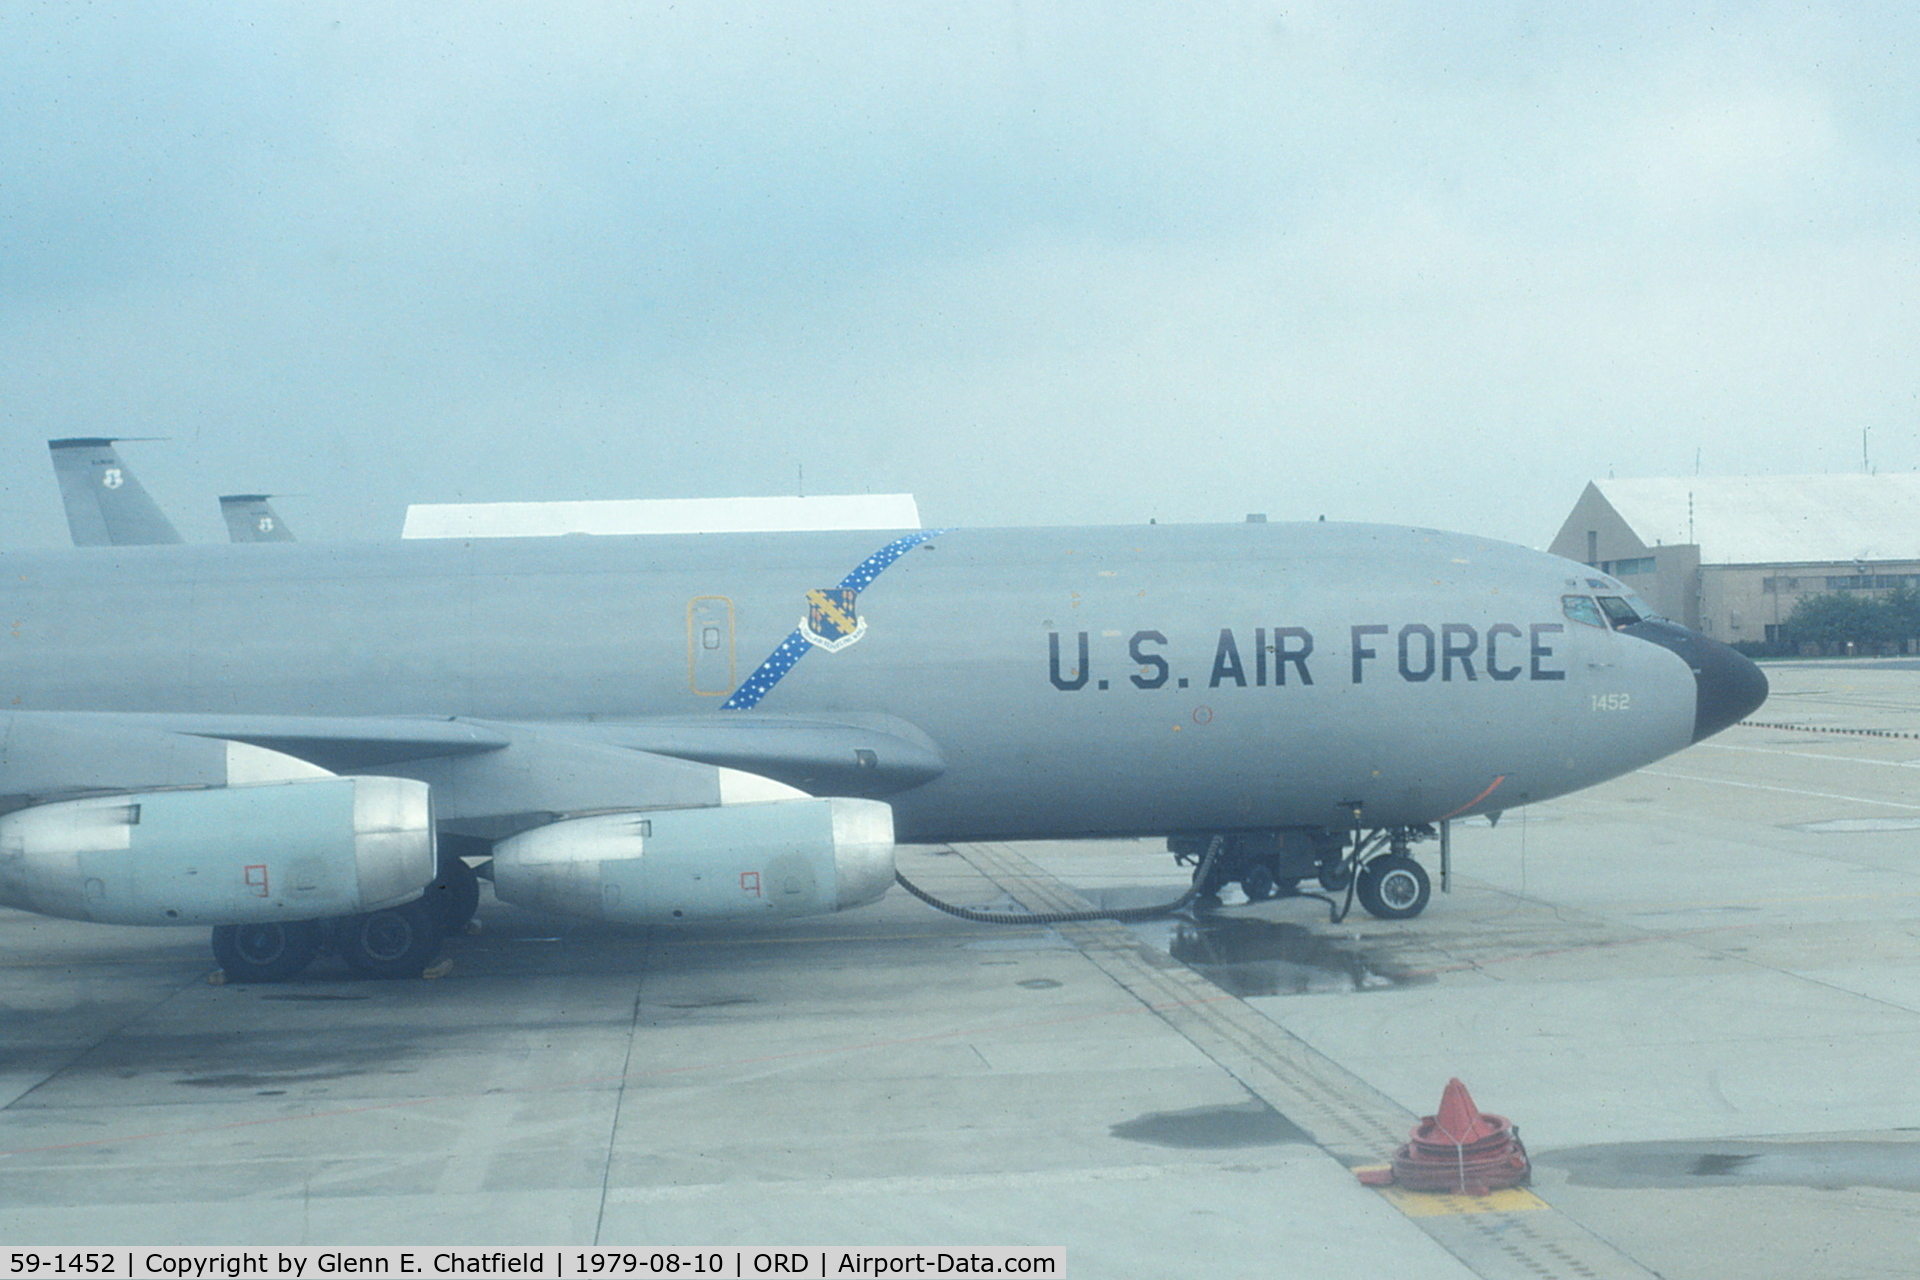 59-1452, 1959 Boeing KC-135E Stratotanker C/N 17940, Shot from the window of another KC-135 while taxiing out.